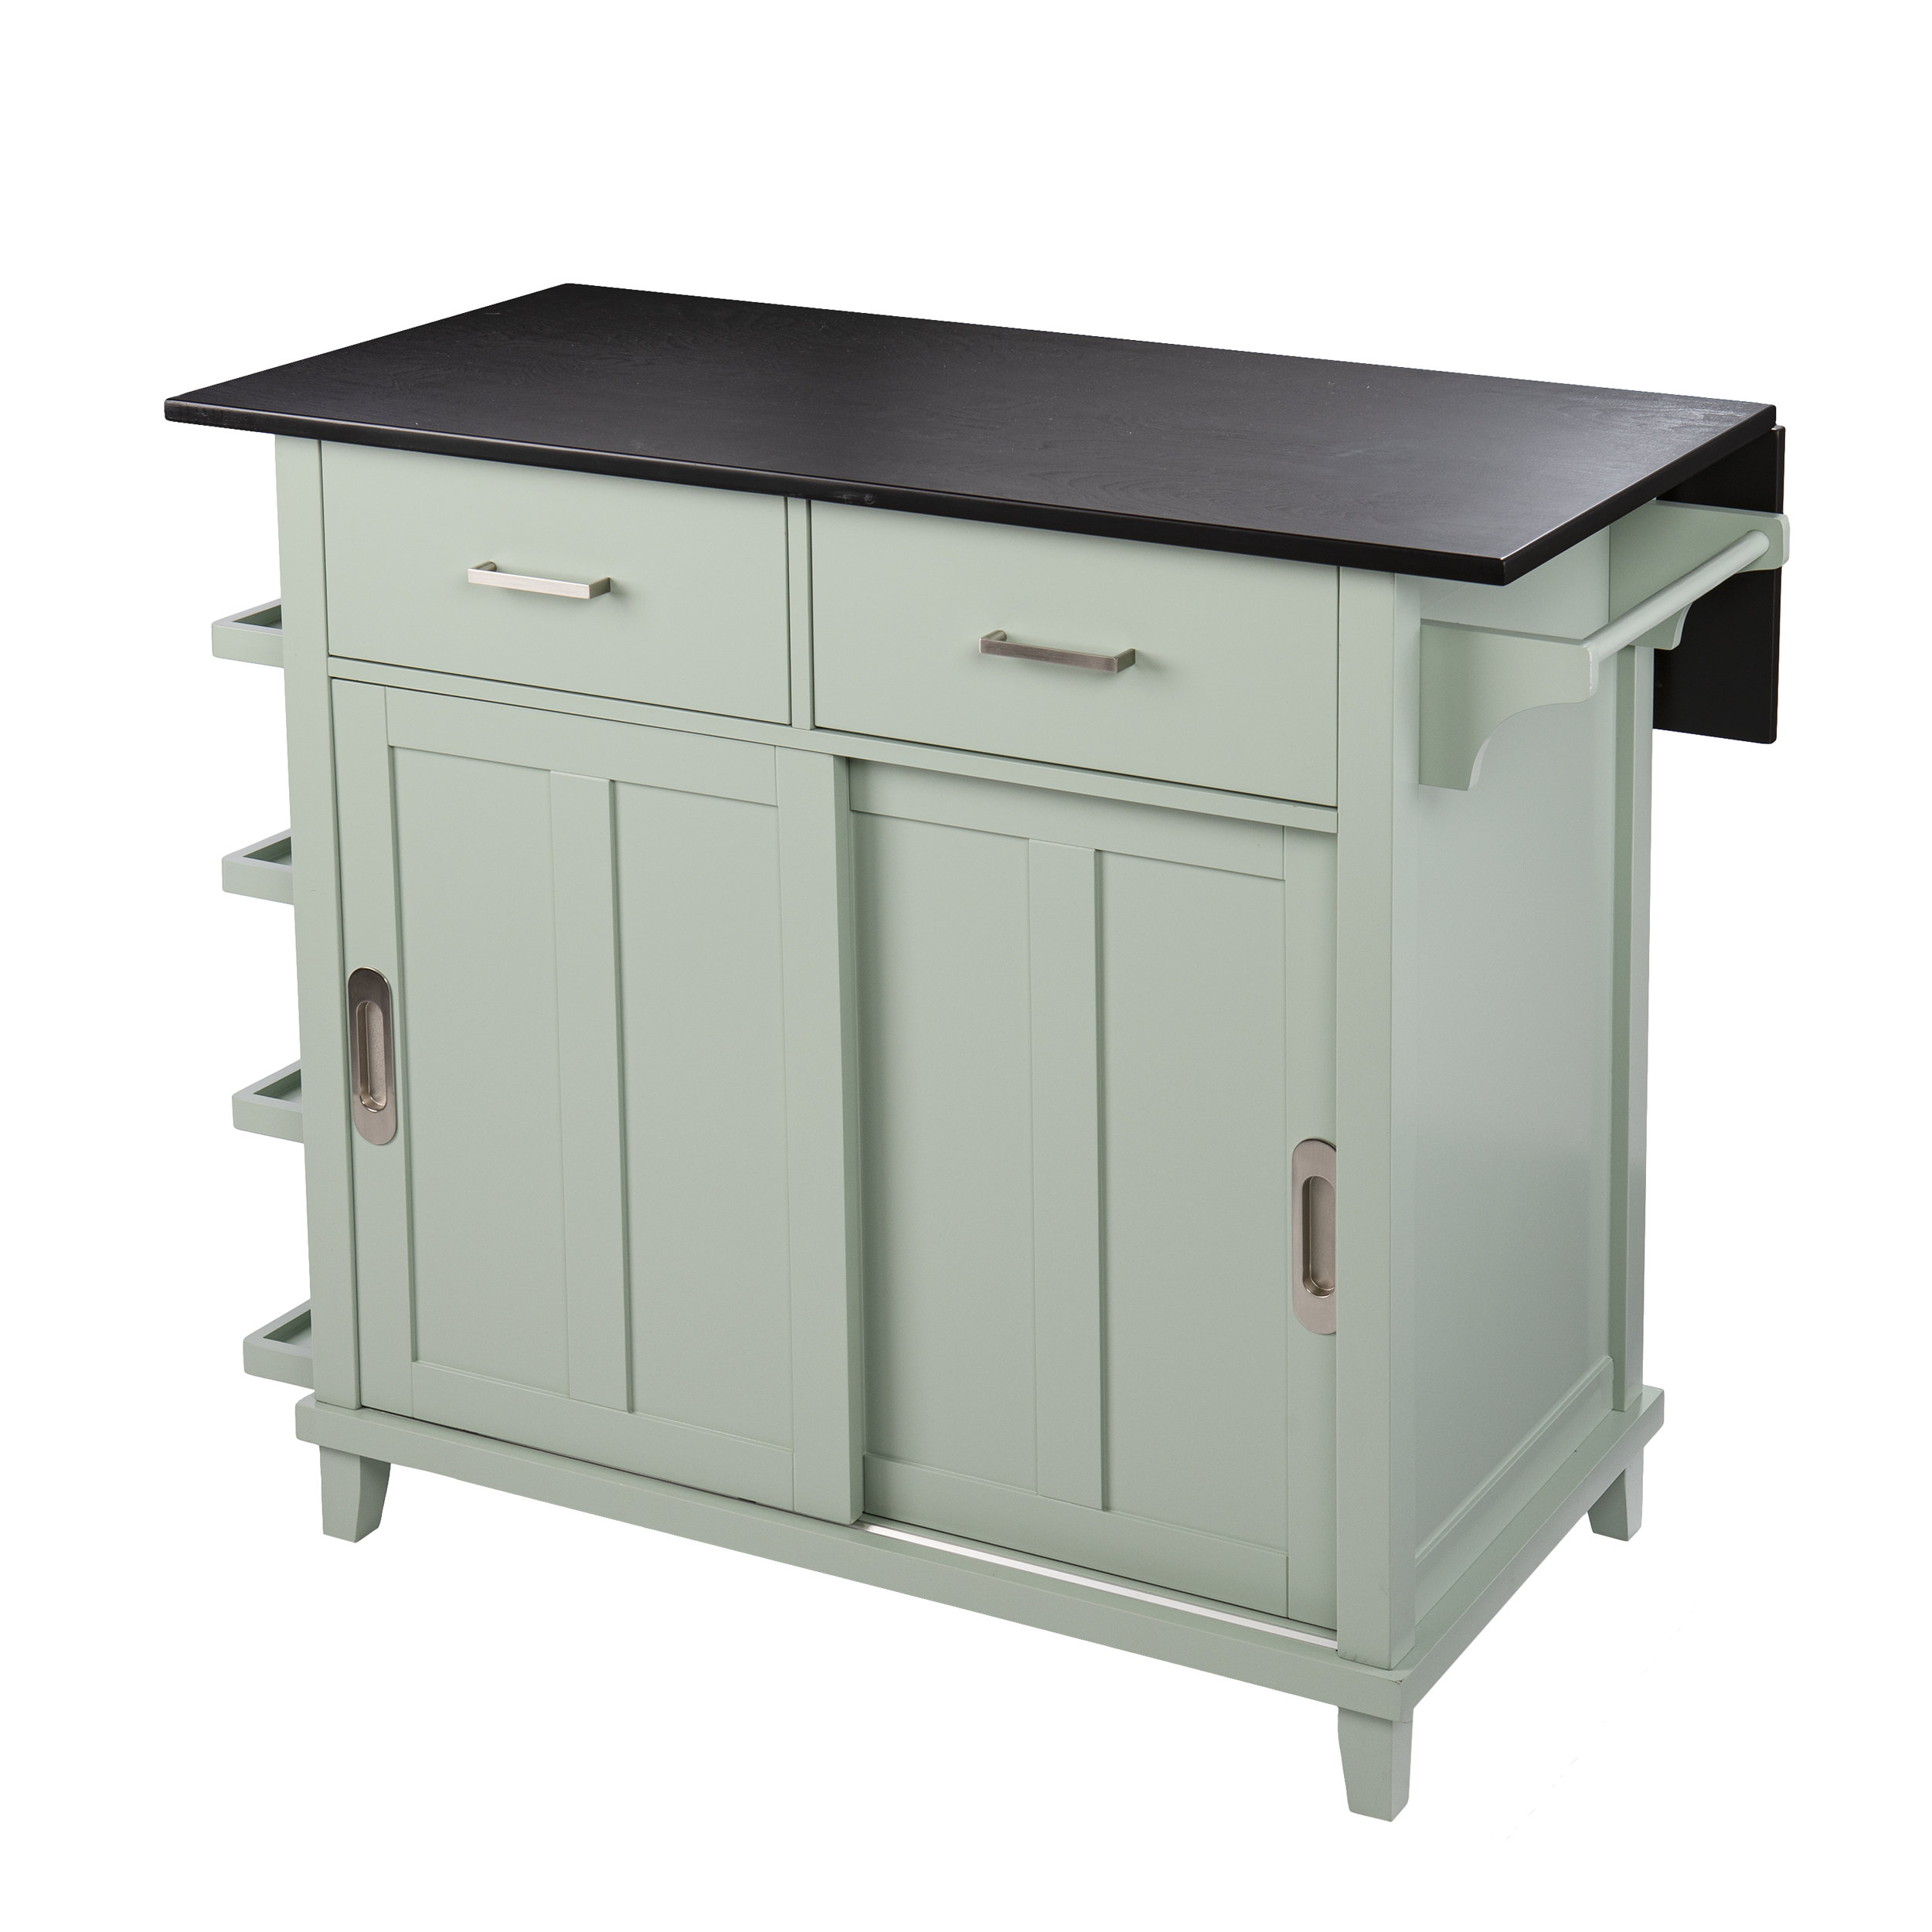 Longshore Tides Freestanding Kitchen Island With Manufactured Wood Reviews Wayfair